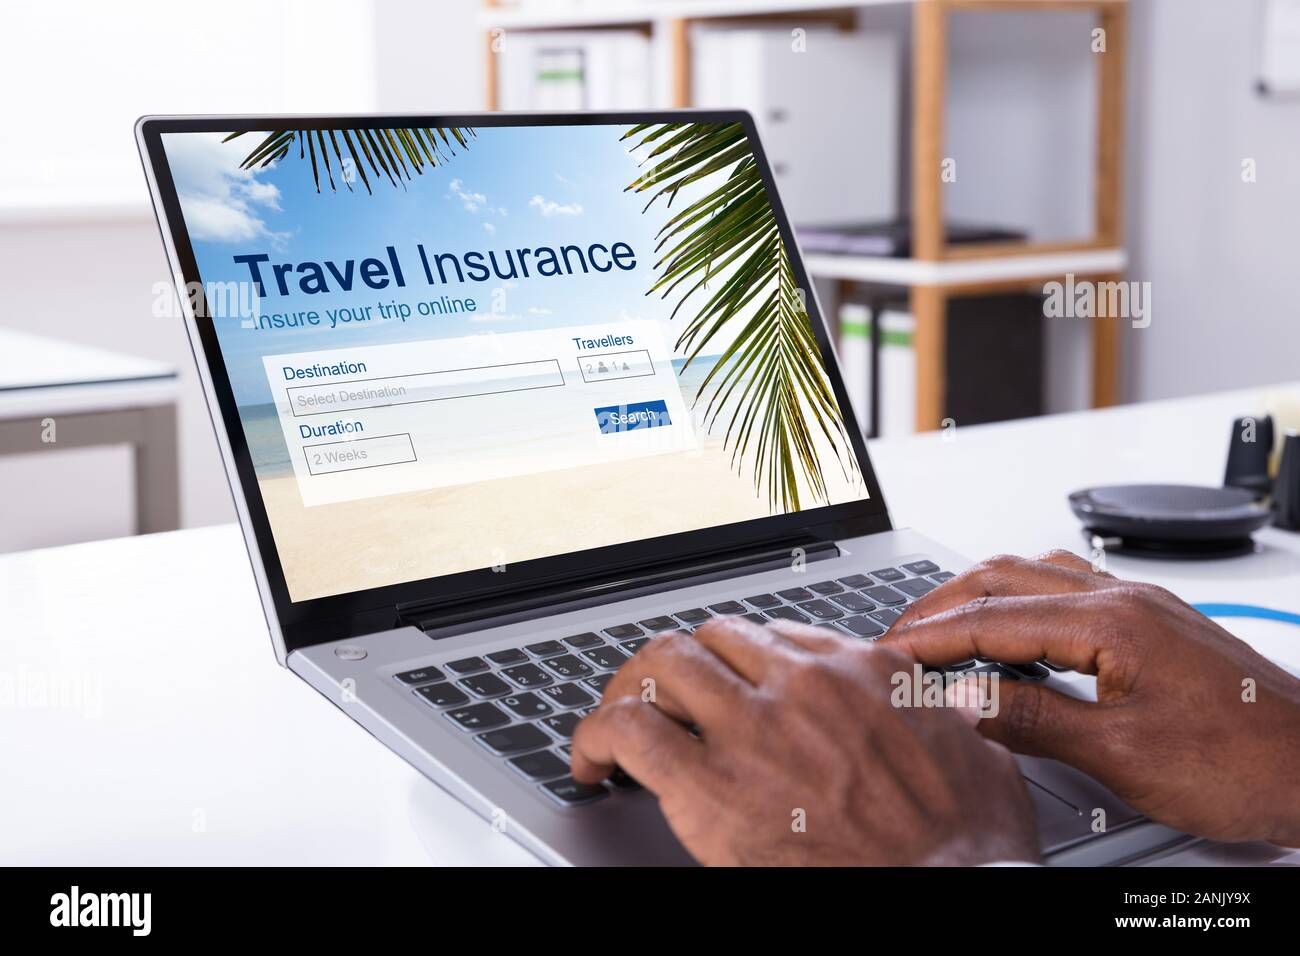 Person's Hands Typing On Keypad Of Laptop With Travel Insurance Application On Screen At Office Stock Photo